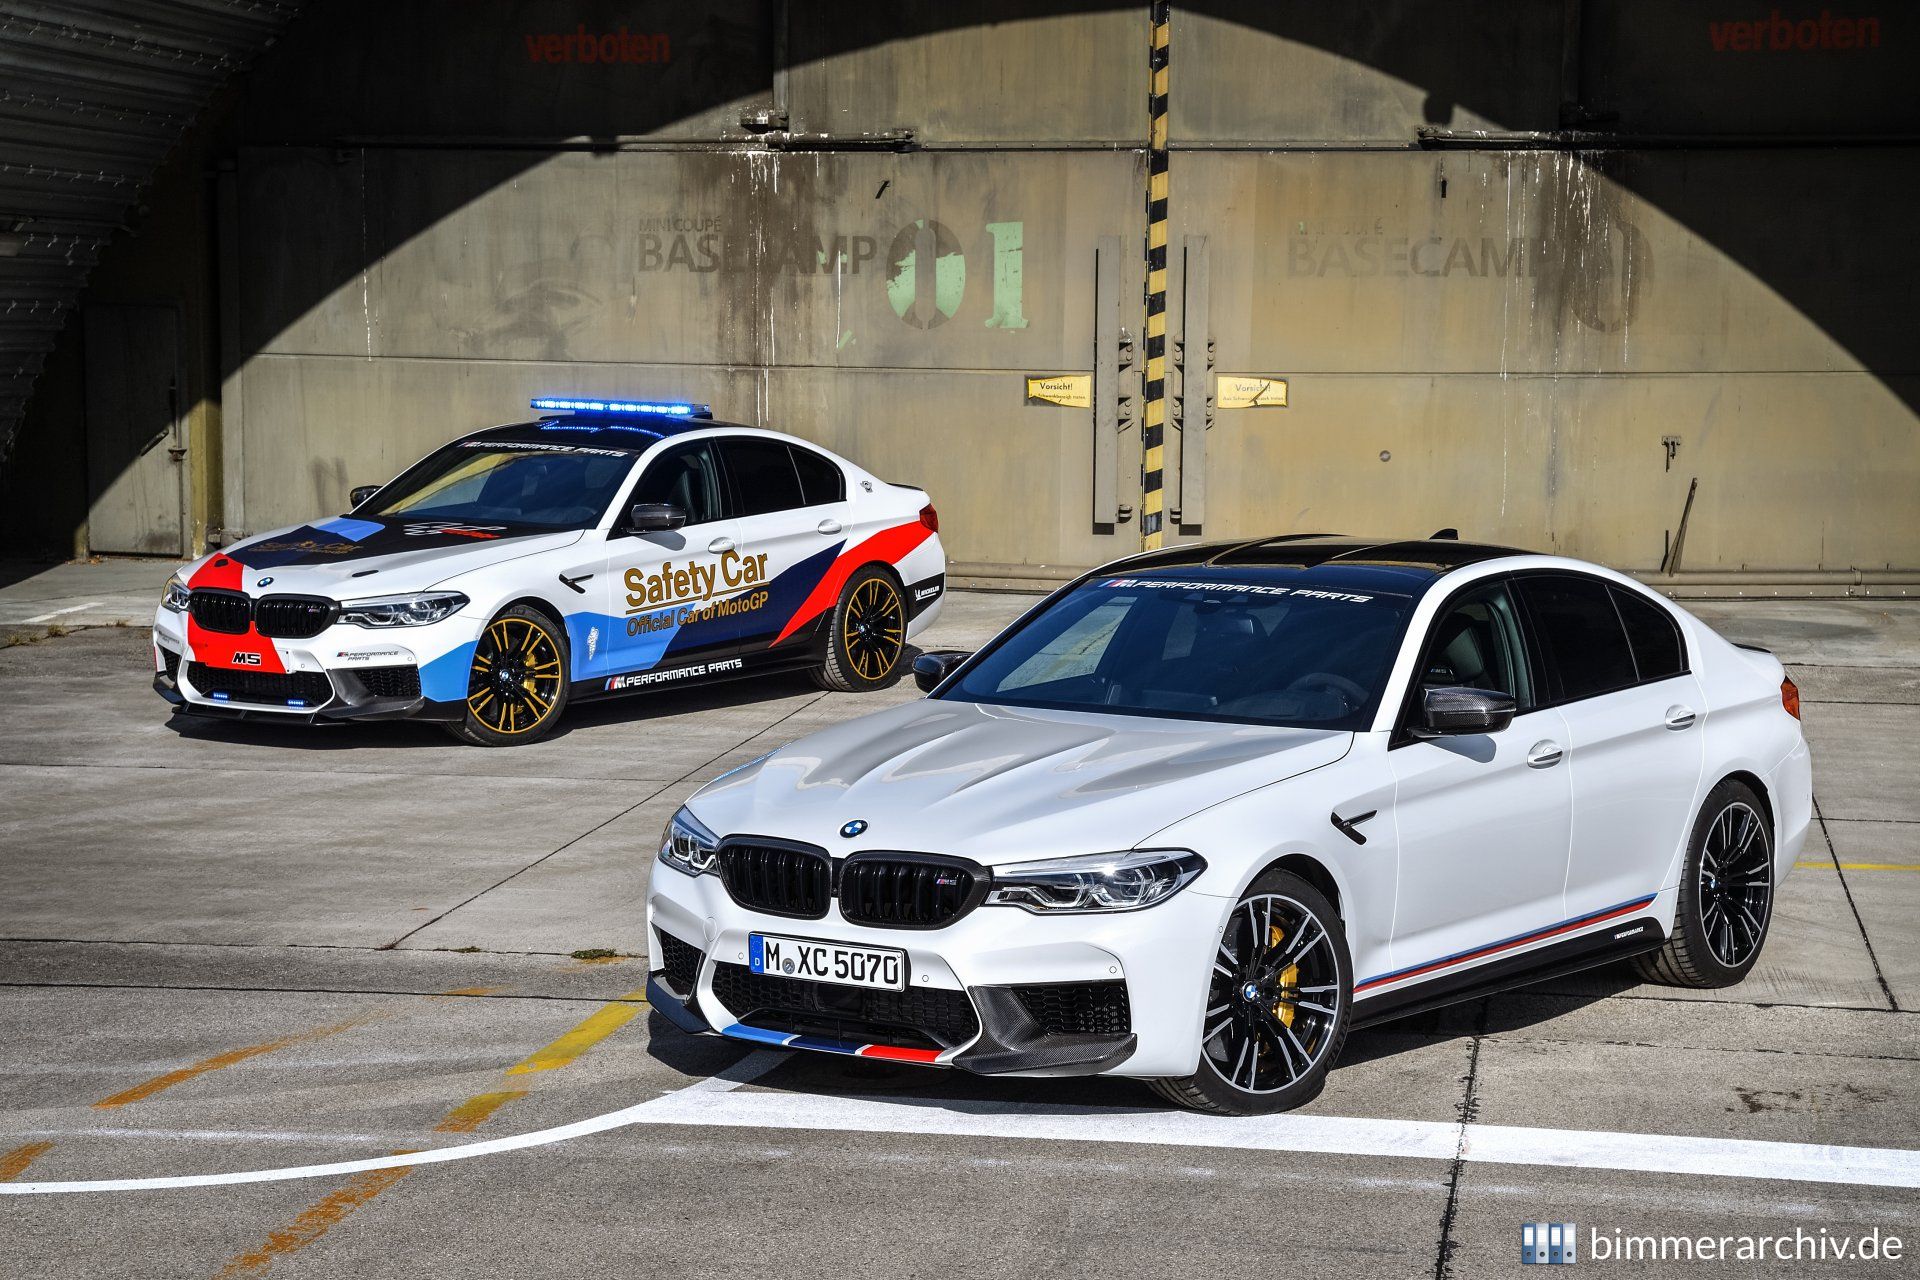 https://www.bimmerarchive.org/images/8634-465-bmw-m5-with-bmw-m-performance-parts@2x.jpg